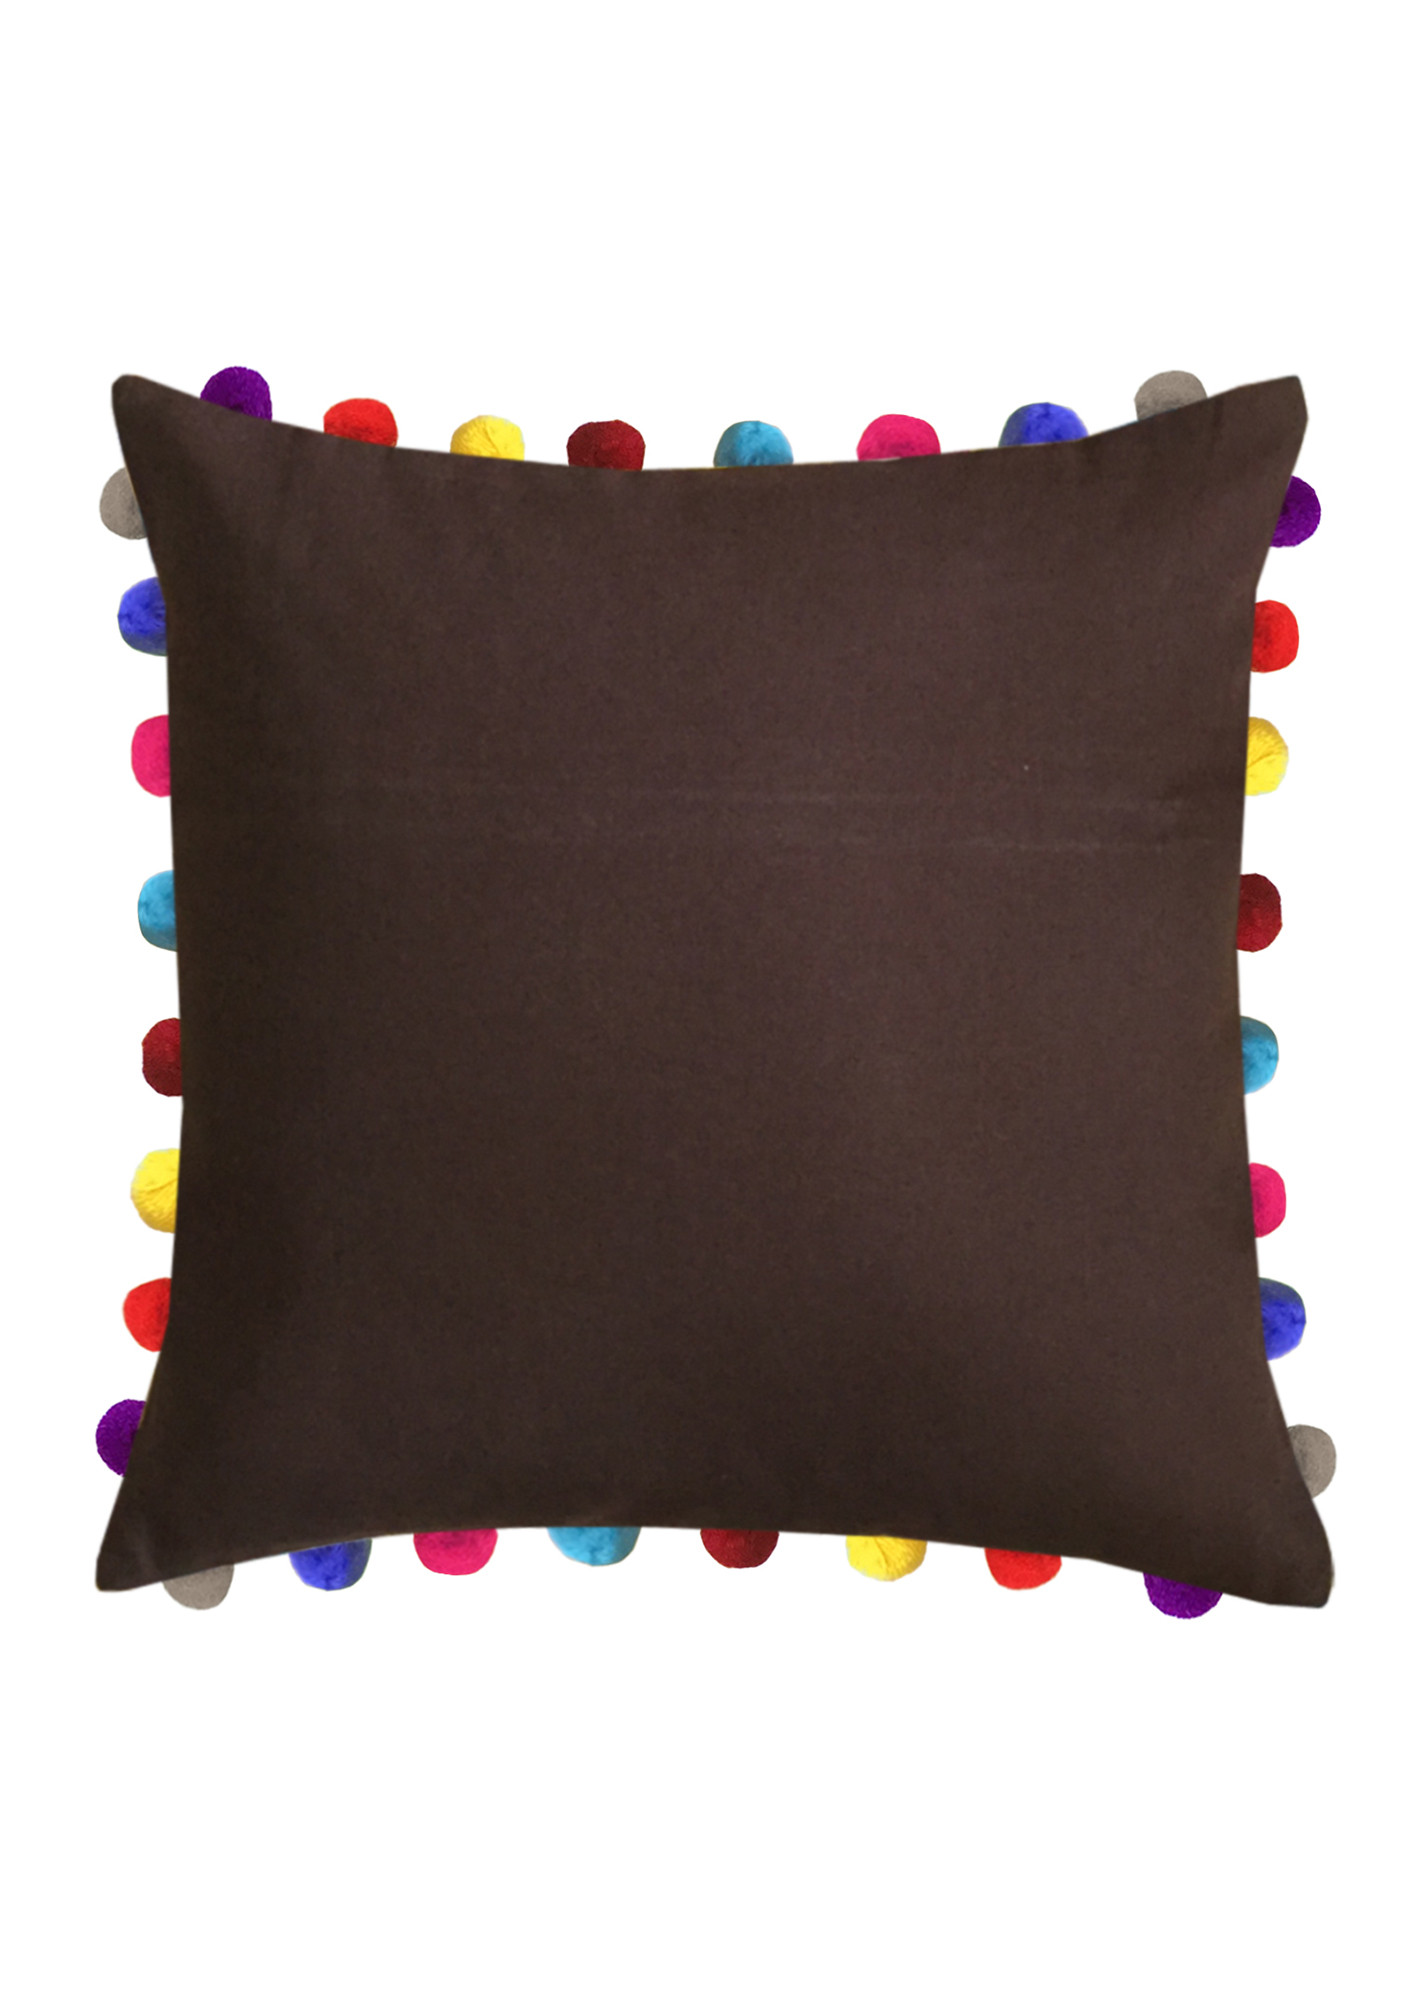 Lushomes Brown Sofa Cushion Cover Online with Colorful Pom Pom (Pack of 1 Pc, 24 x 24 inches)